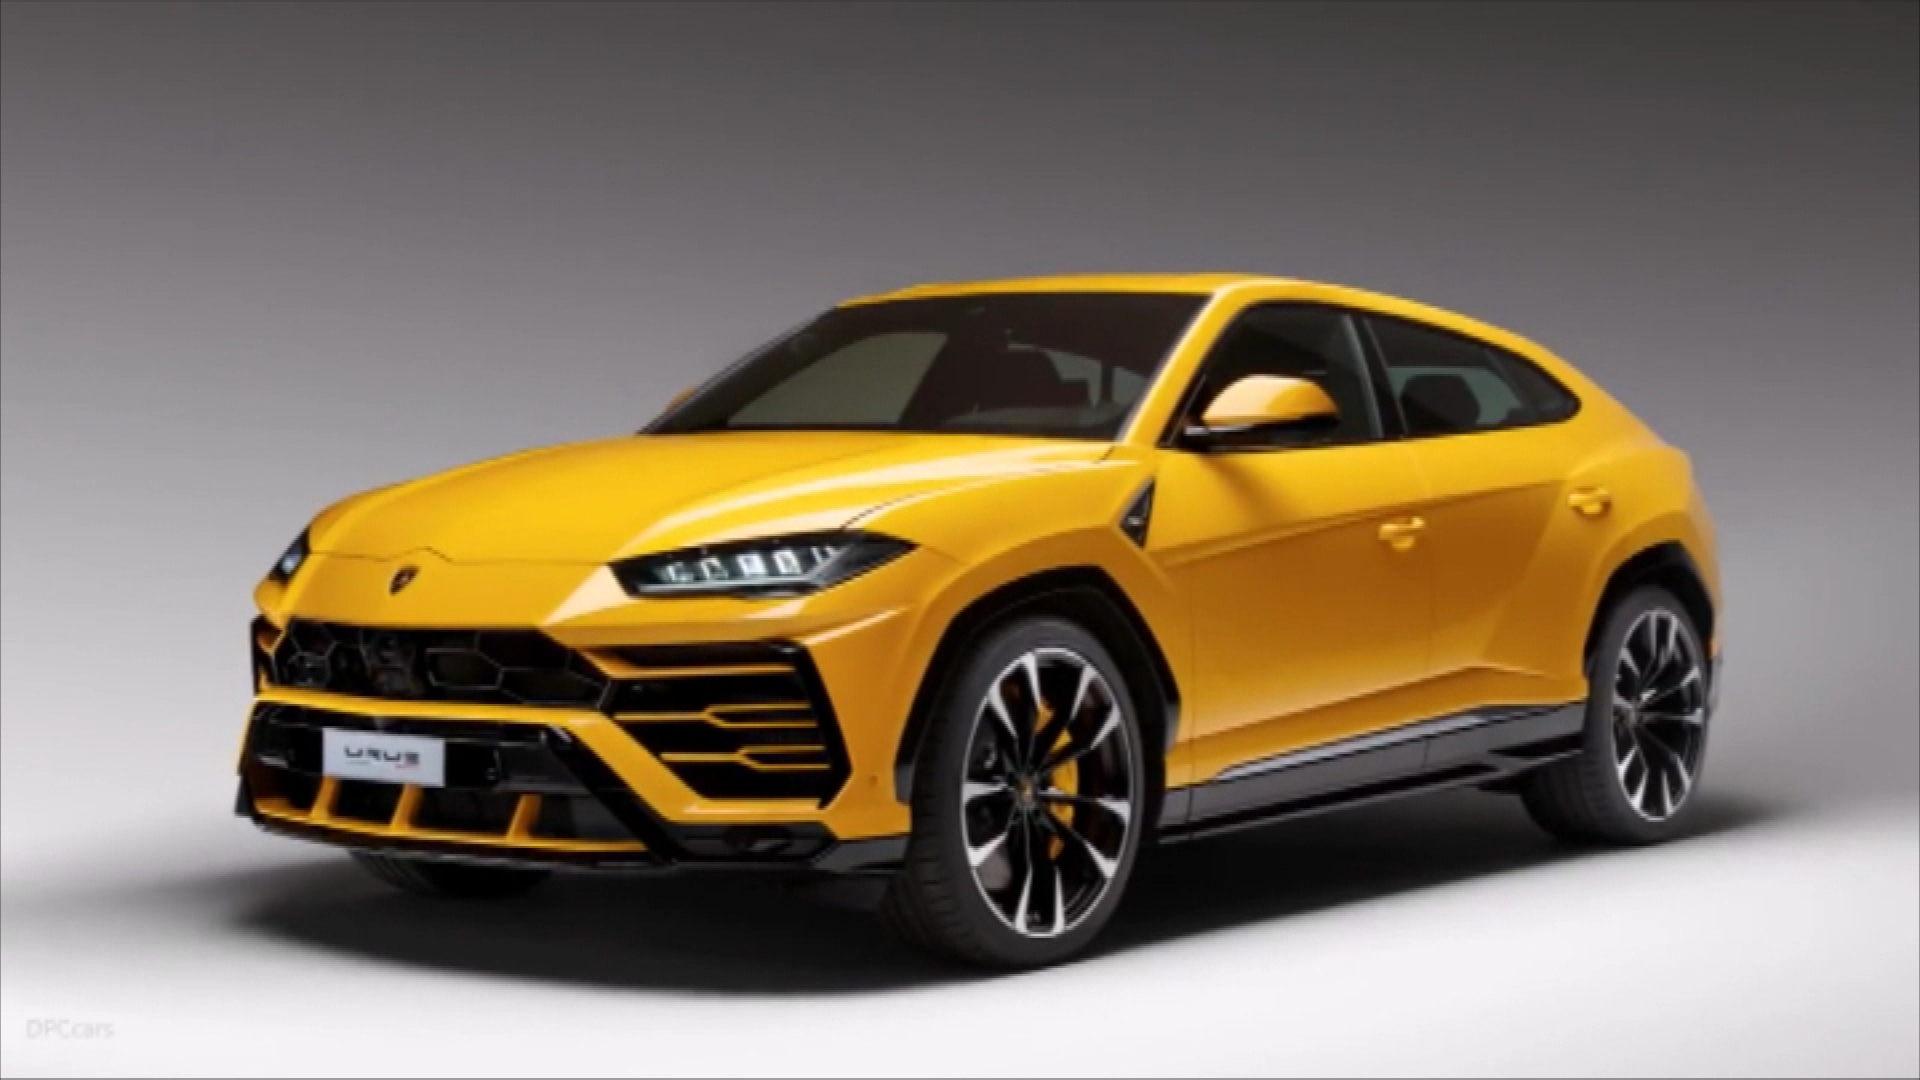 There will also be a hybrid version of Lamborghini's best-selling car, the grand SUV Urus, but not 100% electric in the plans for now